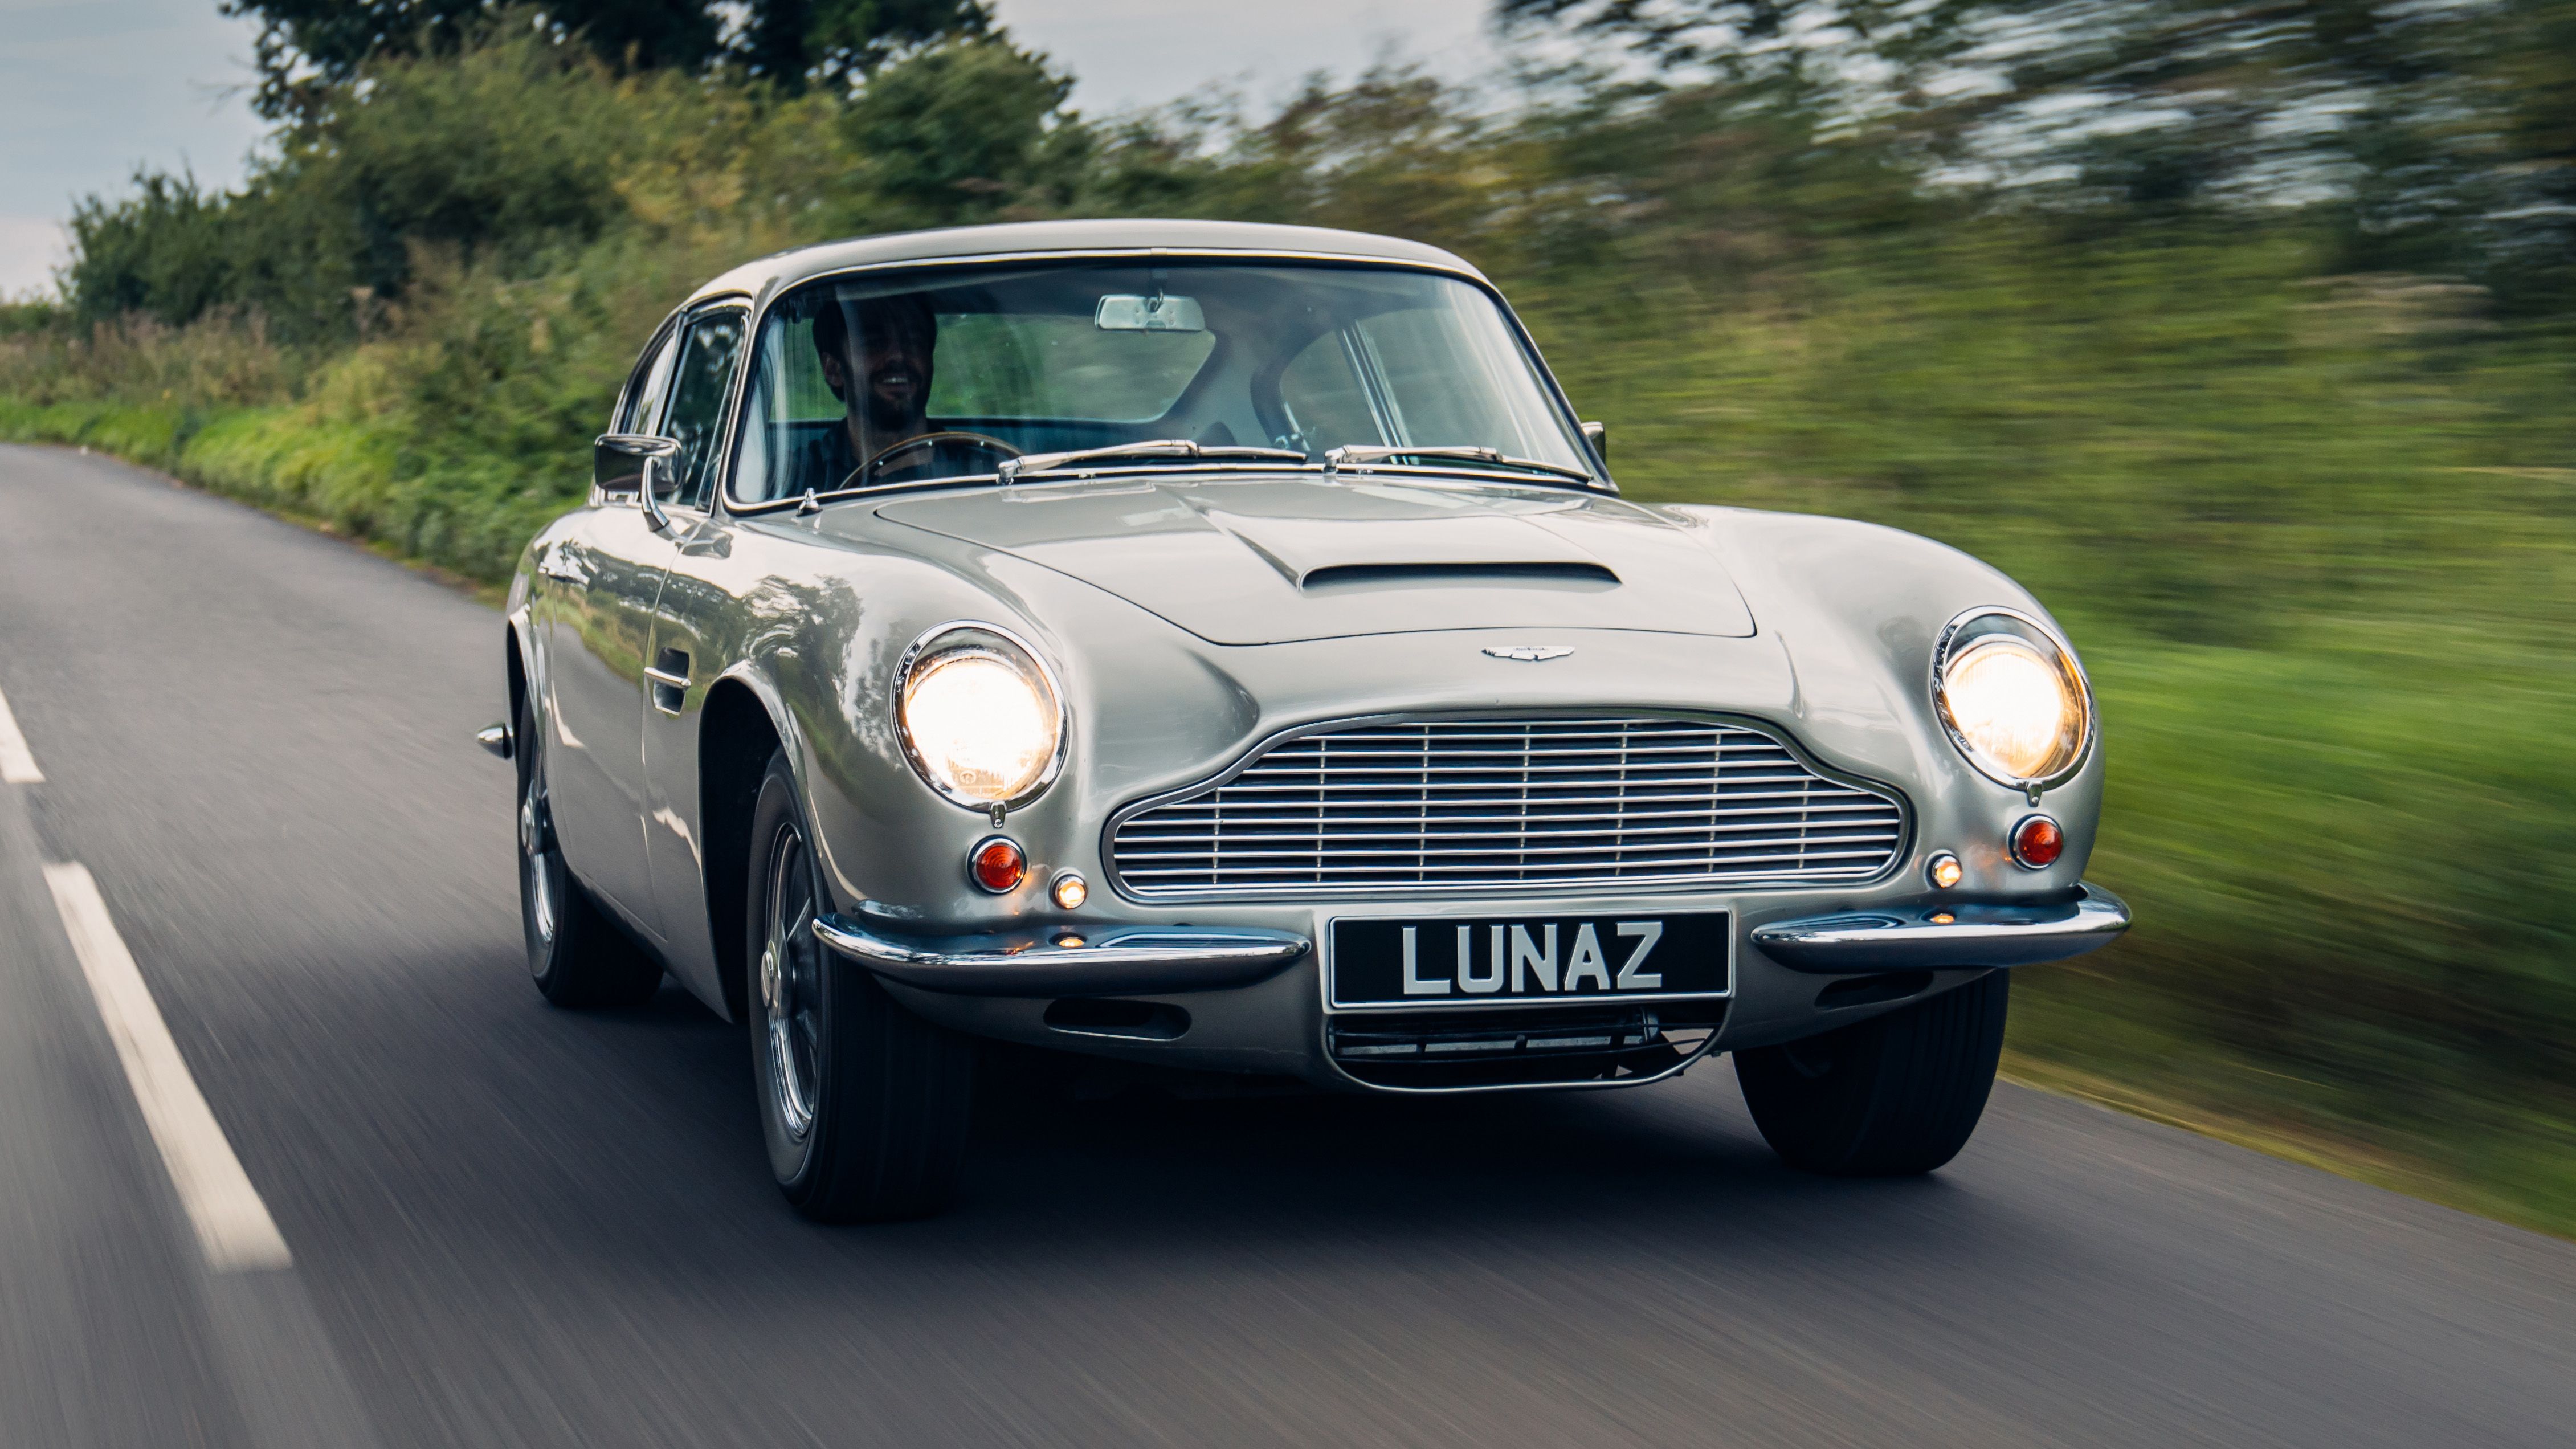 An Image Of A Aston Martin DB6 In Motion